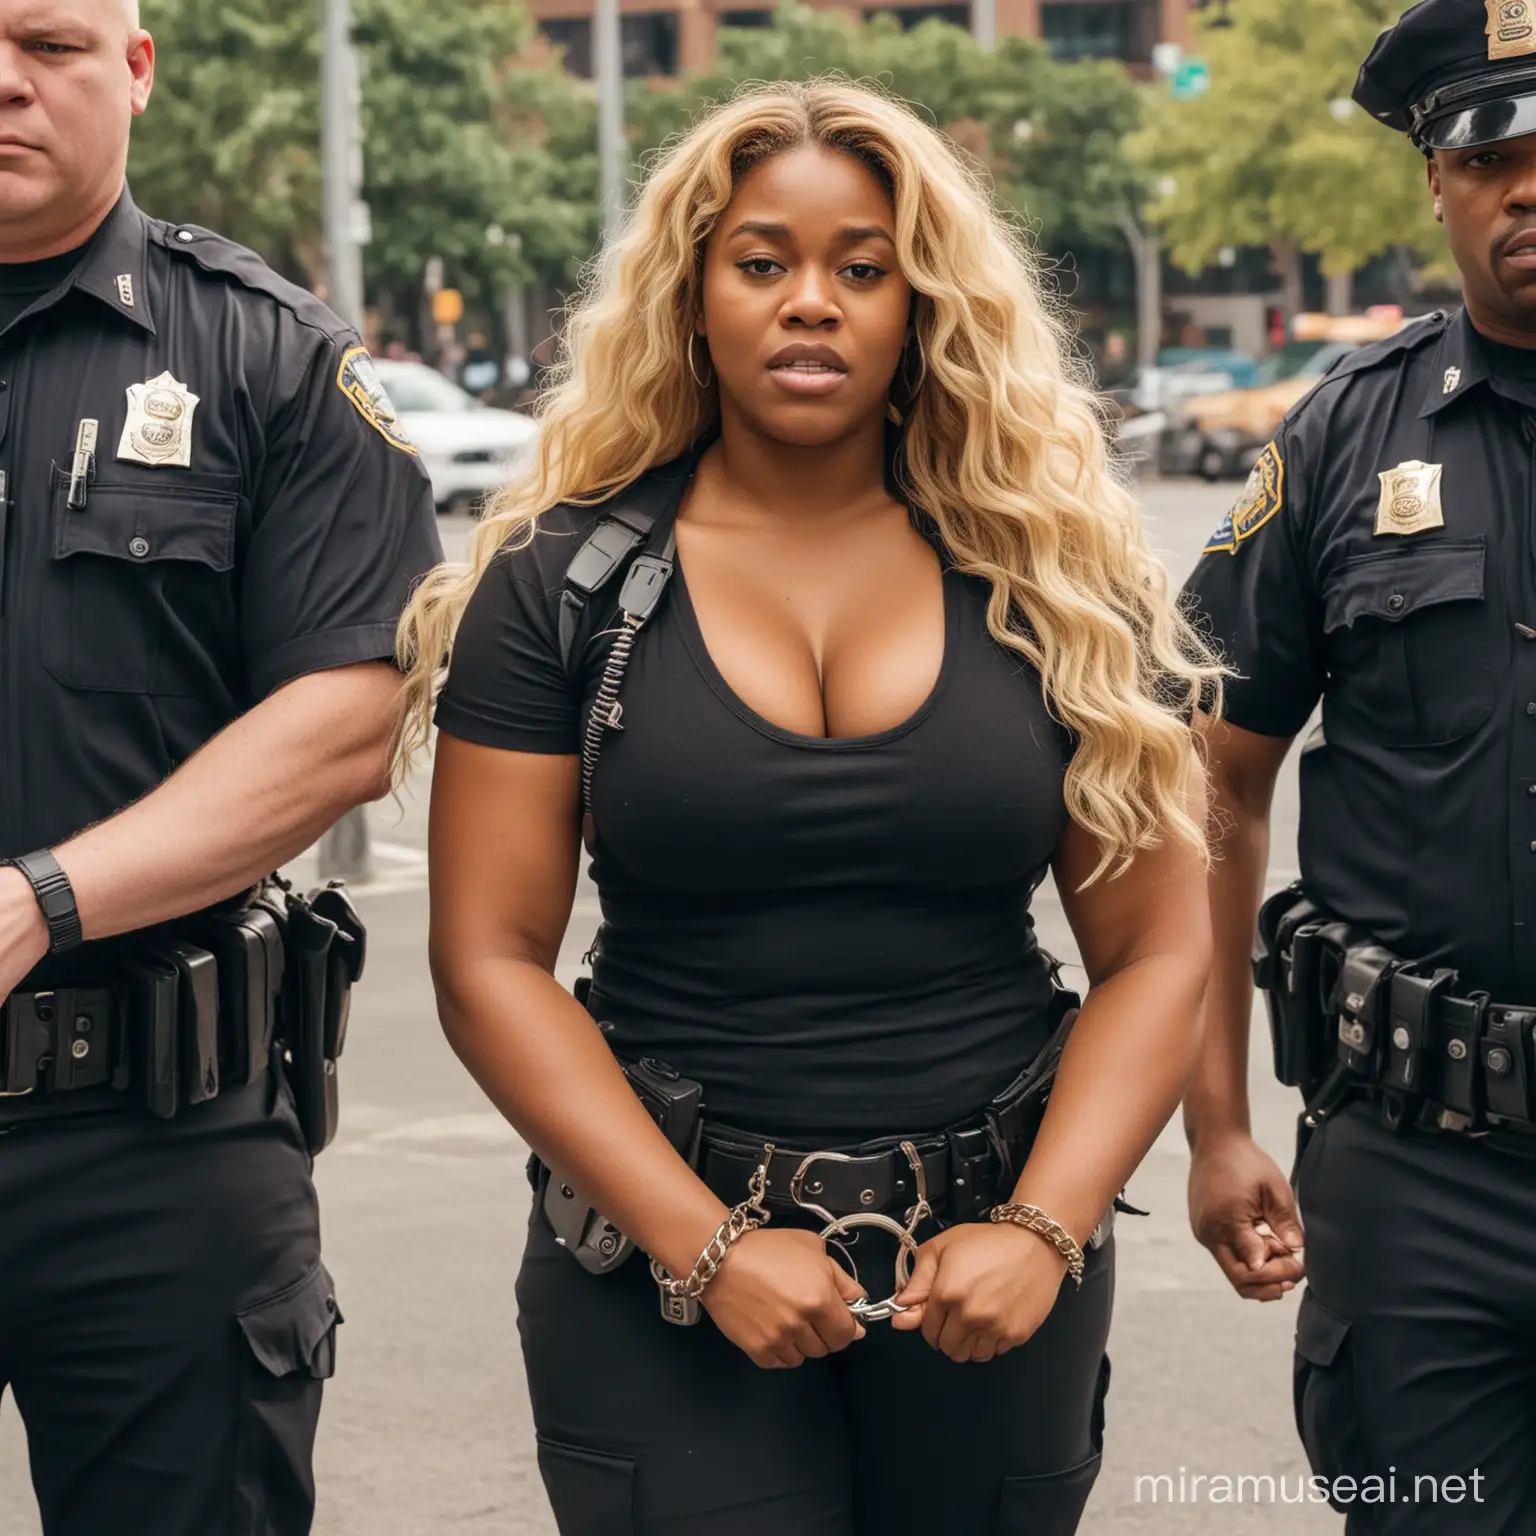 Jessica a slightly overweight black woman with long blonde hair getting arrested, getting put in handcuffs by angry cops